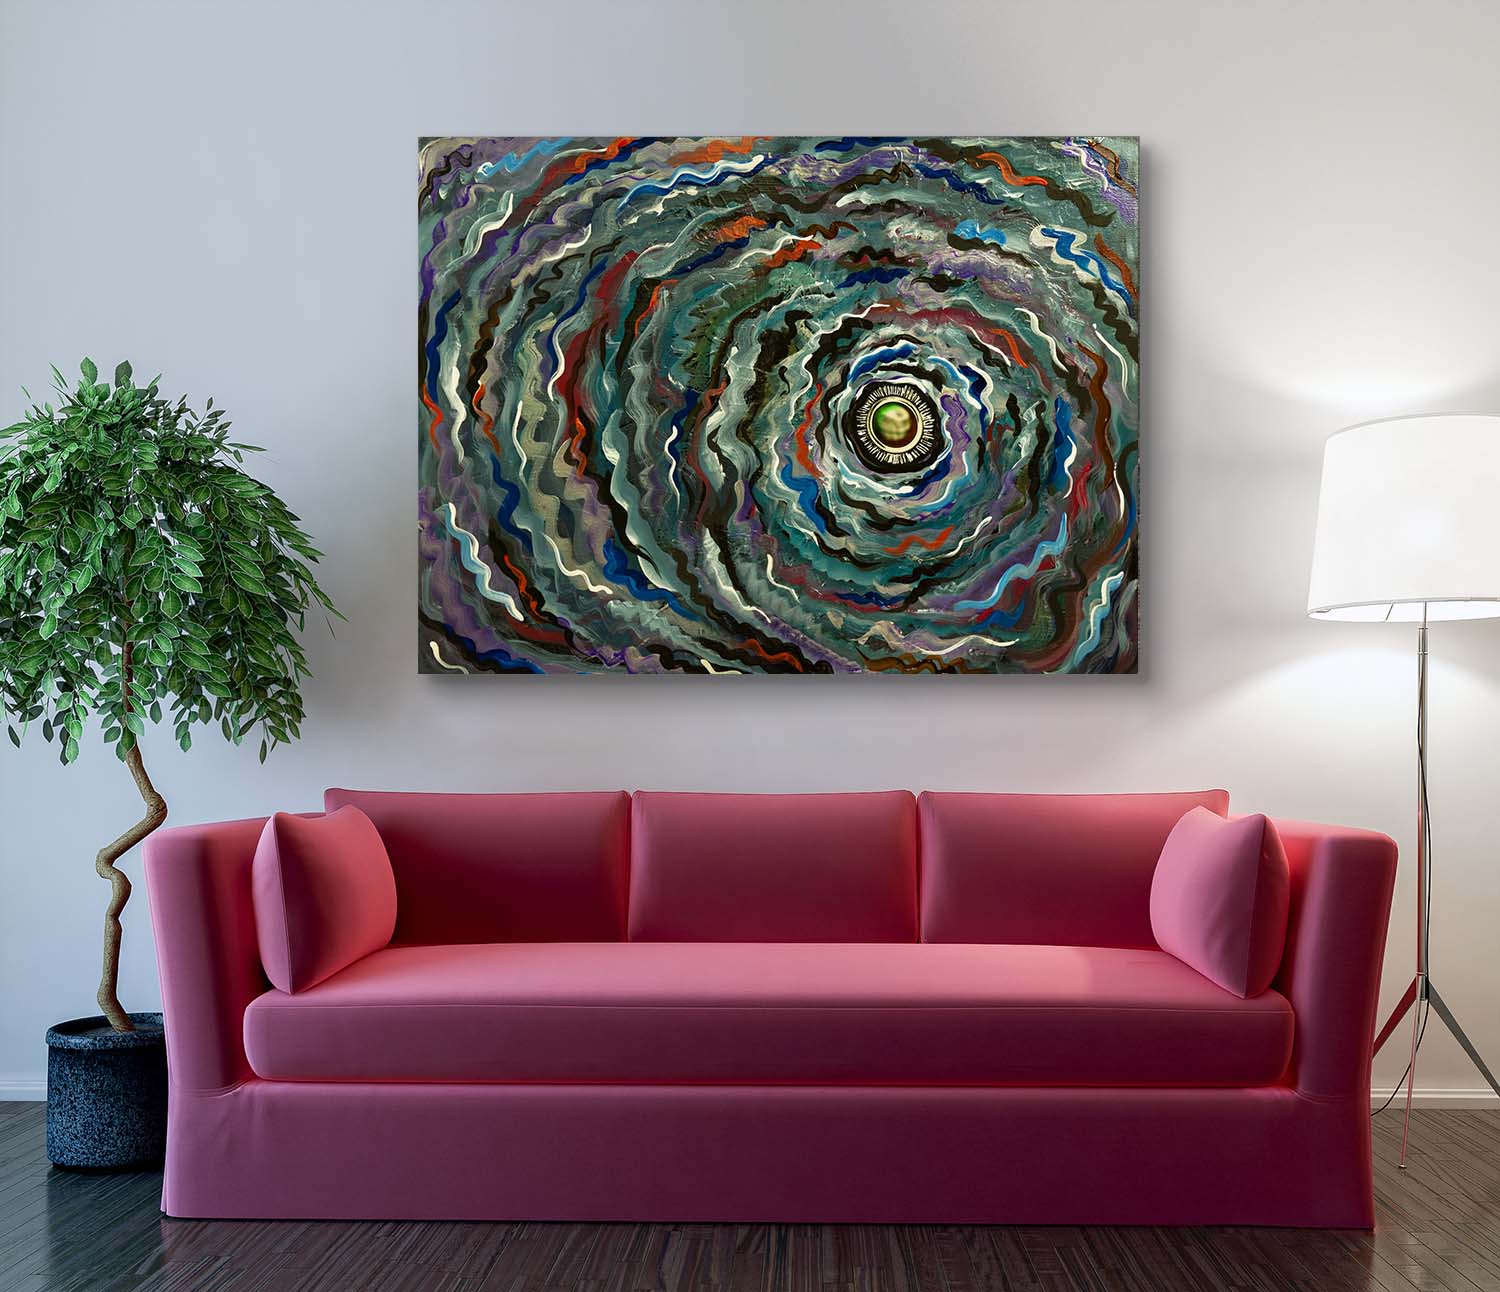 Metallic Vortex canvas print on wall over a Rose couch